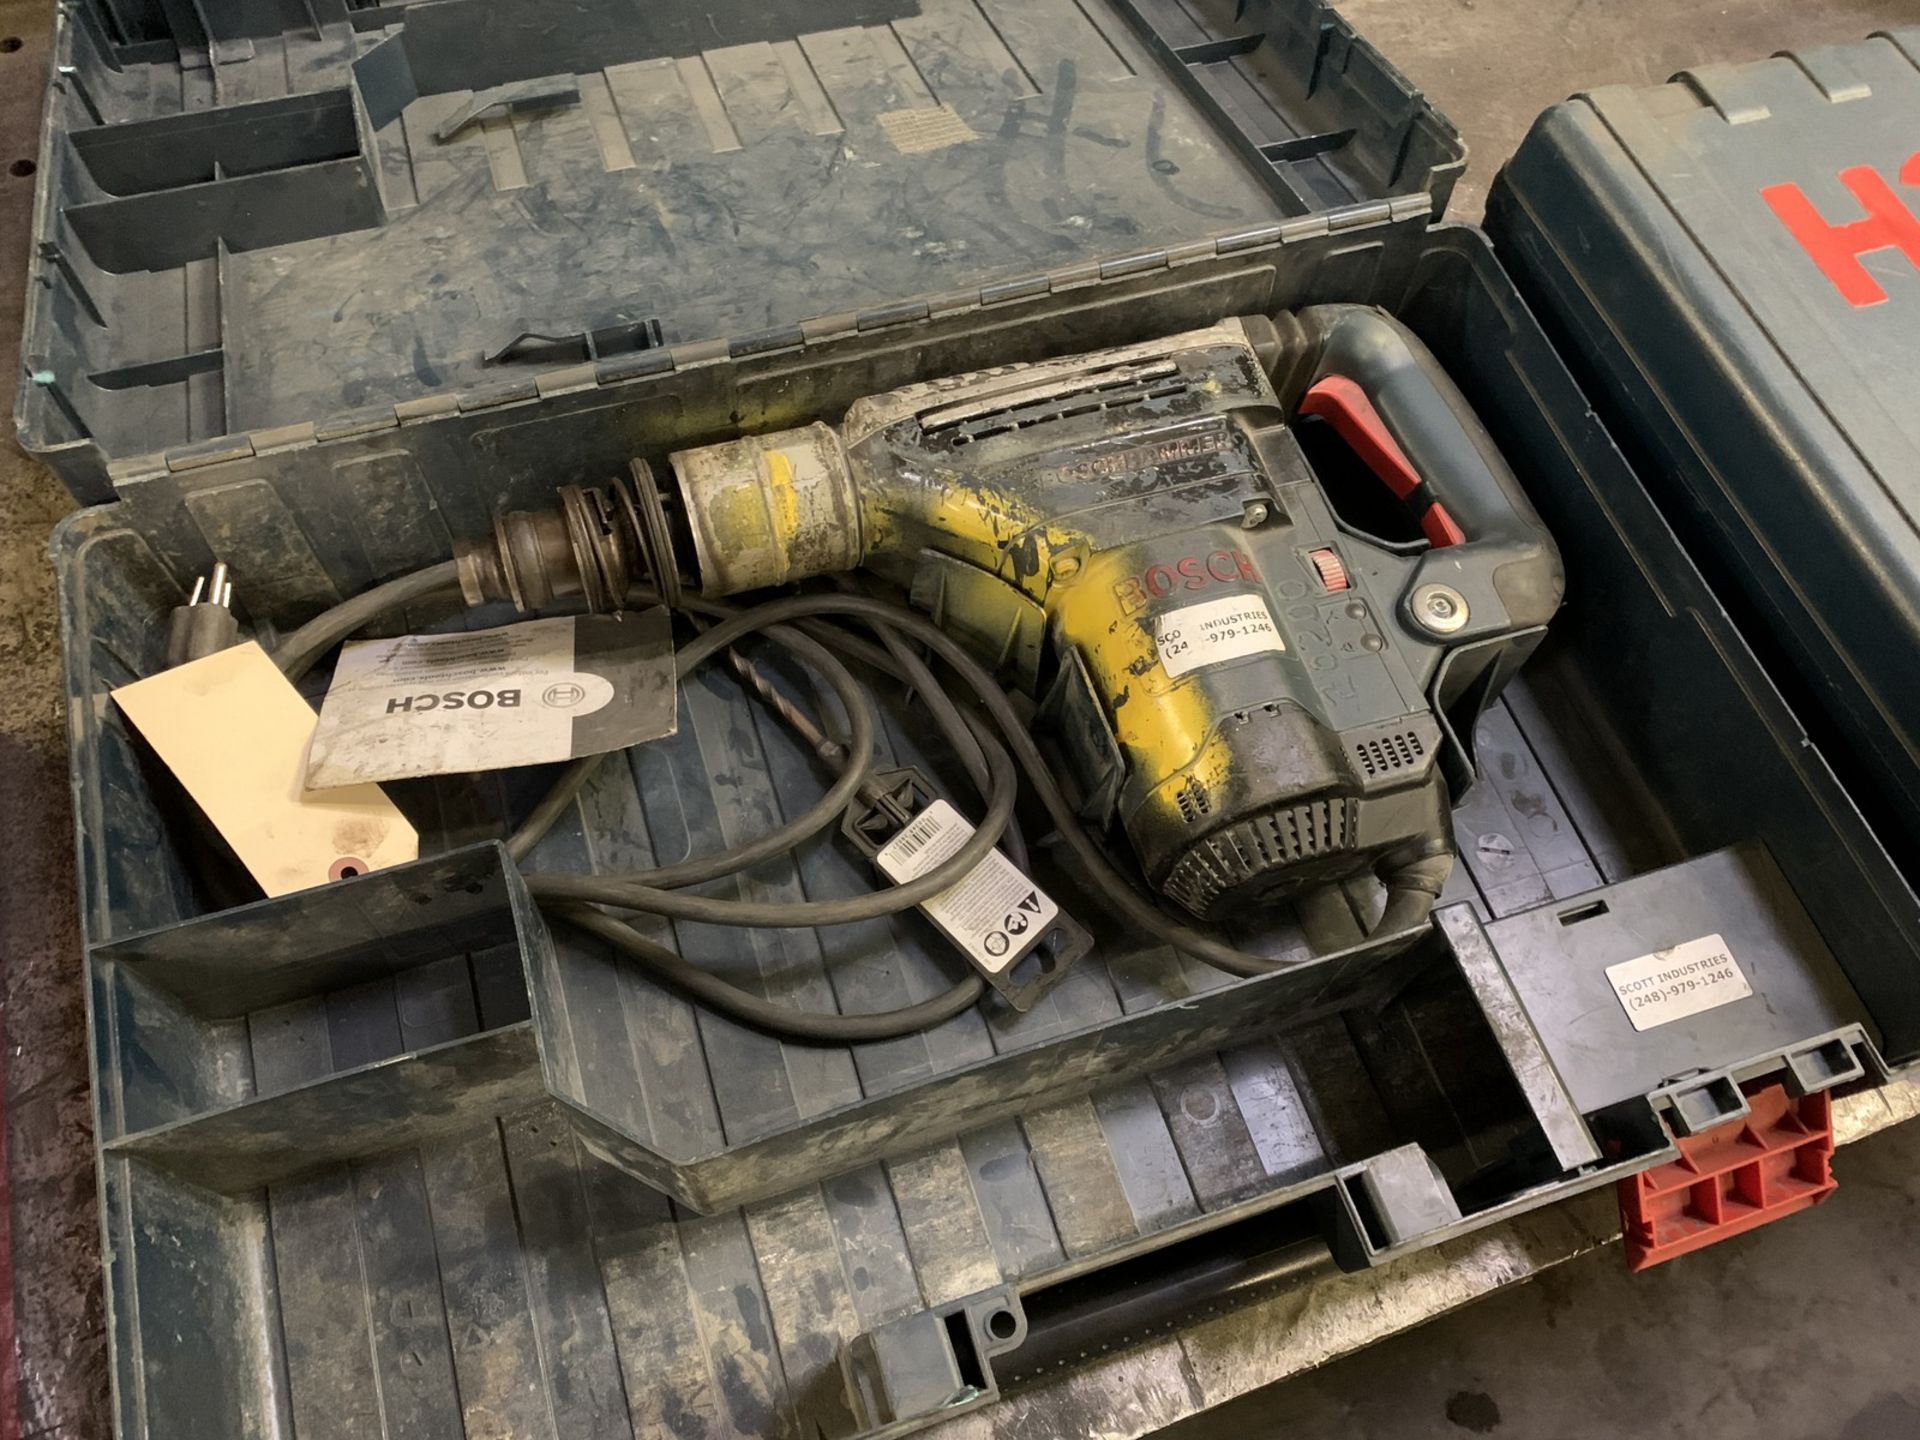 Bosch Hammer Drill with Case (All Items MUST be Removed by Thursday, December 19, 2019. Buyer is